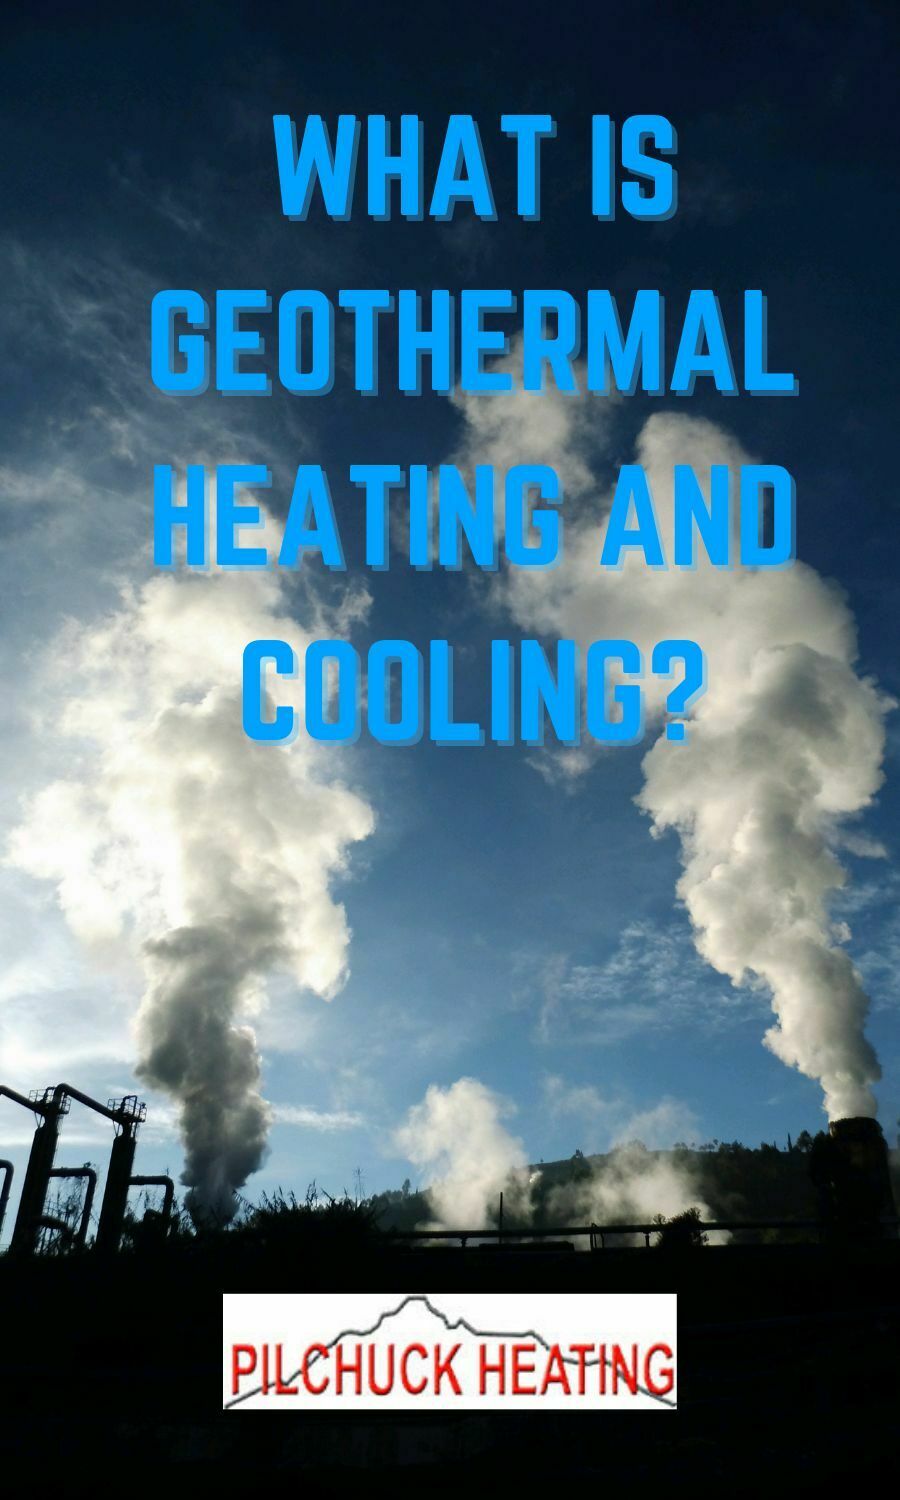 What is Geothermal Heating and Cooling?